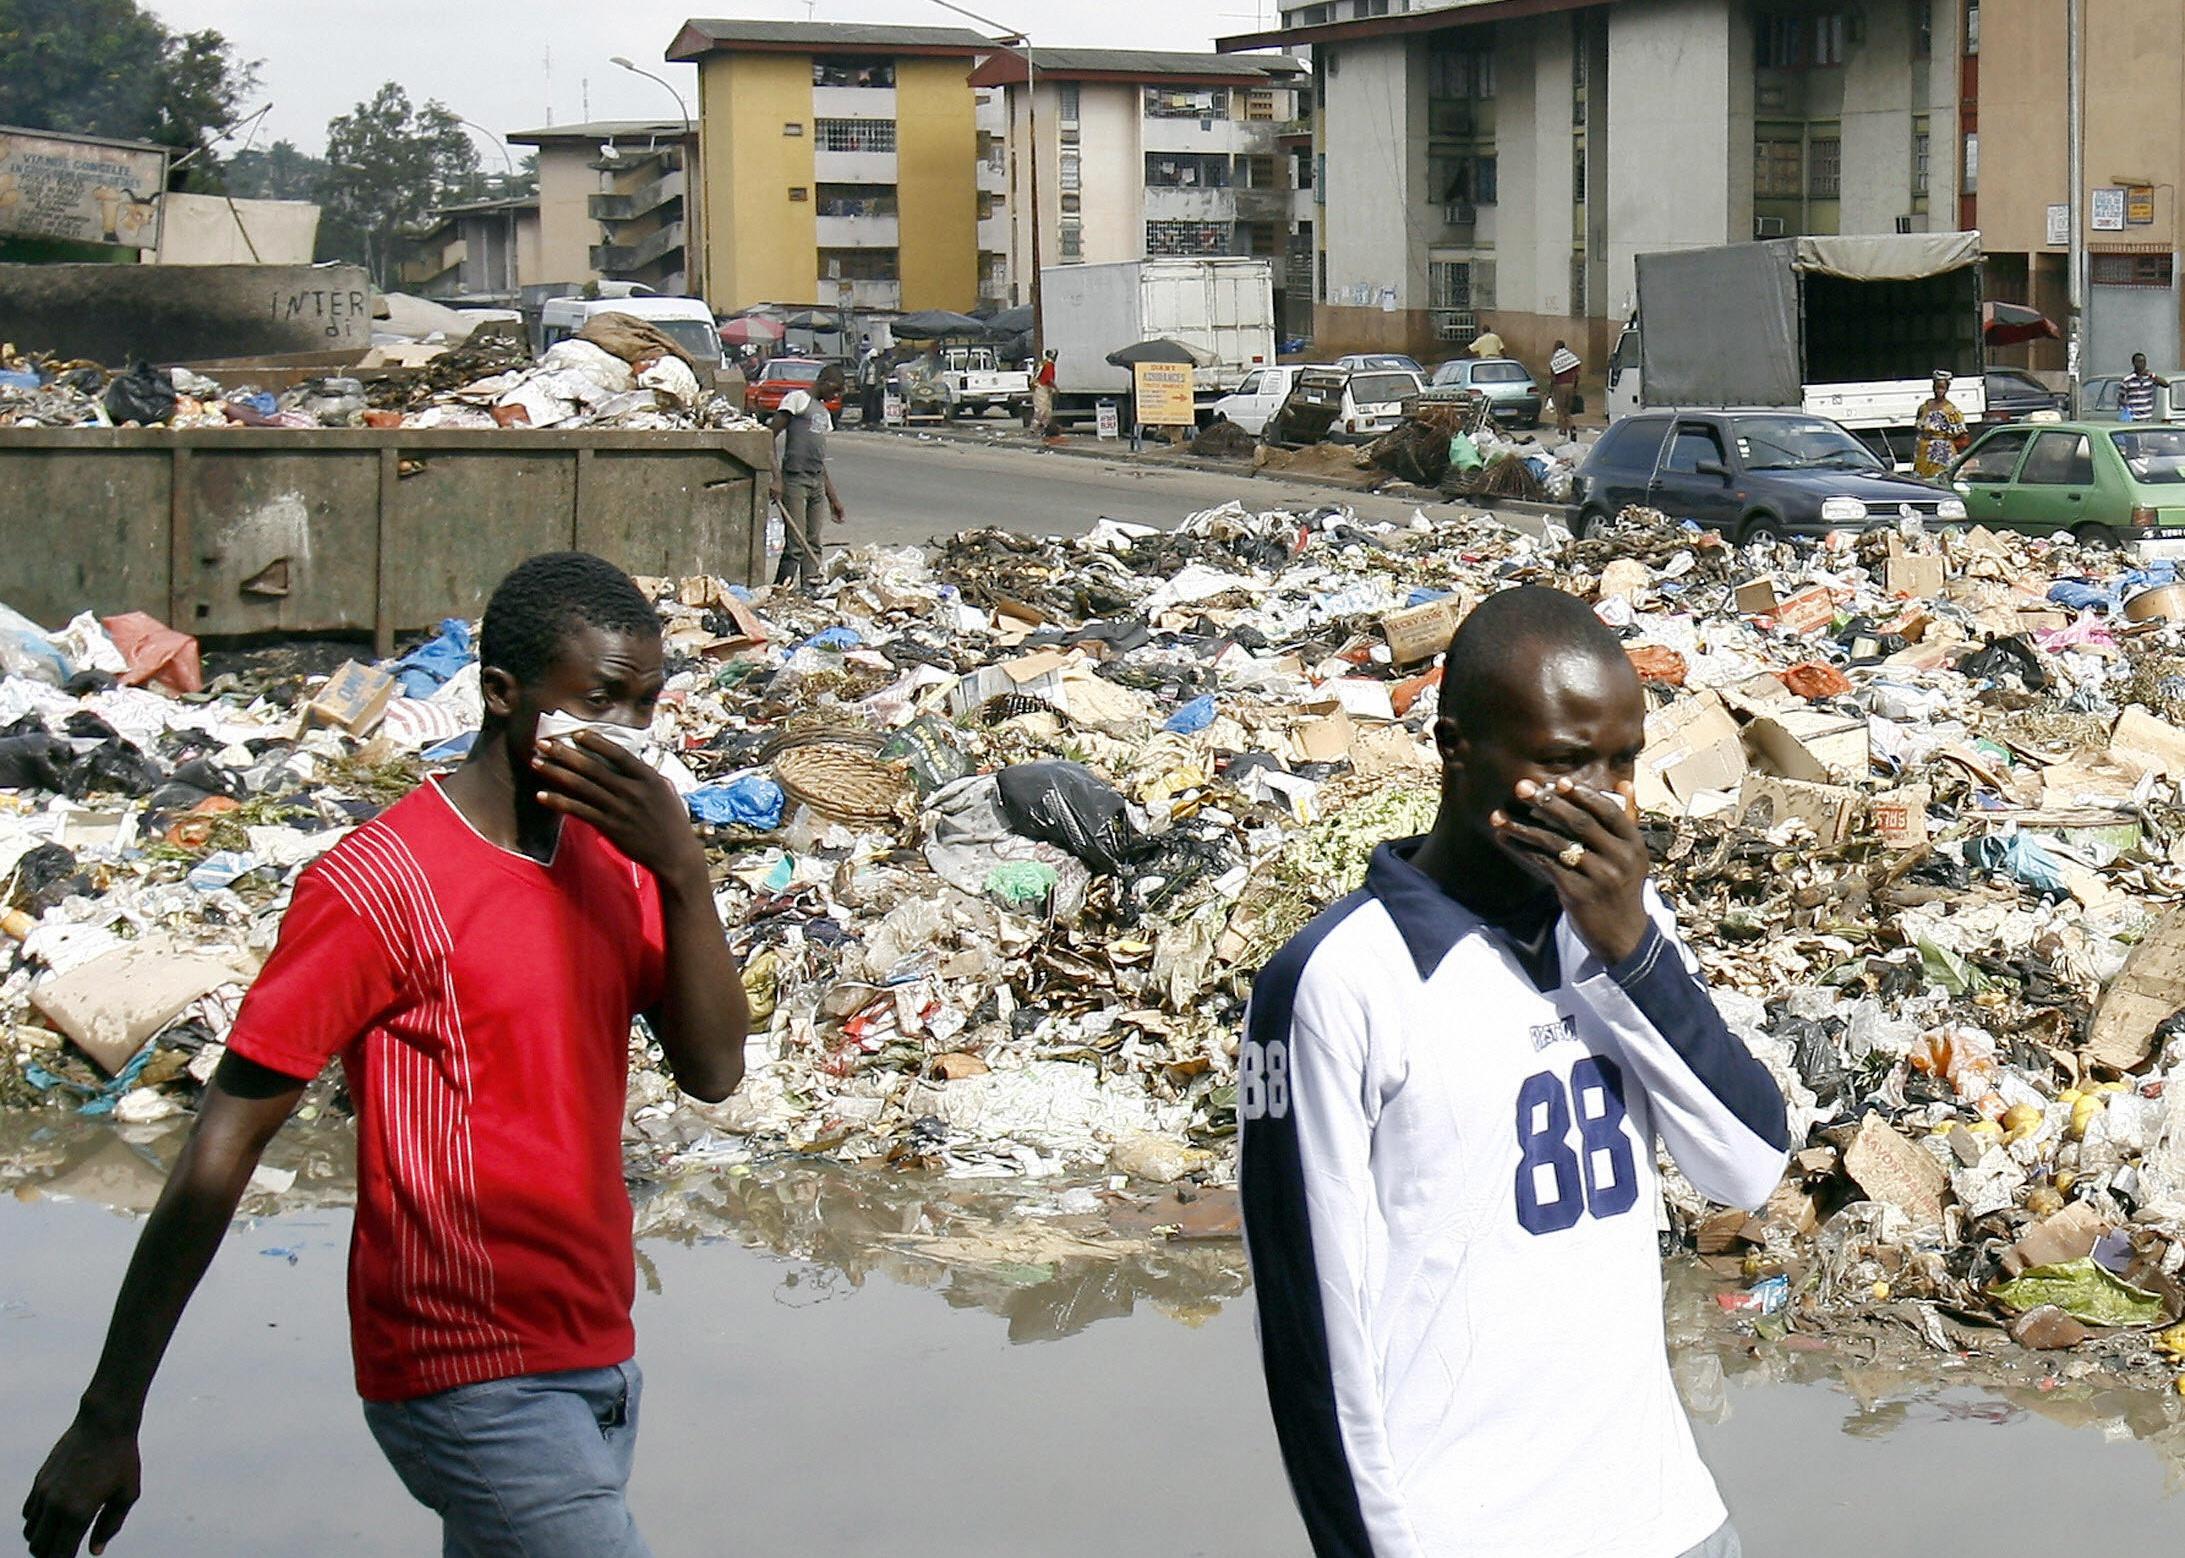  Men protect themselves from the smell in front of a dump in an Abidjan district.